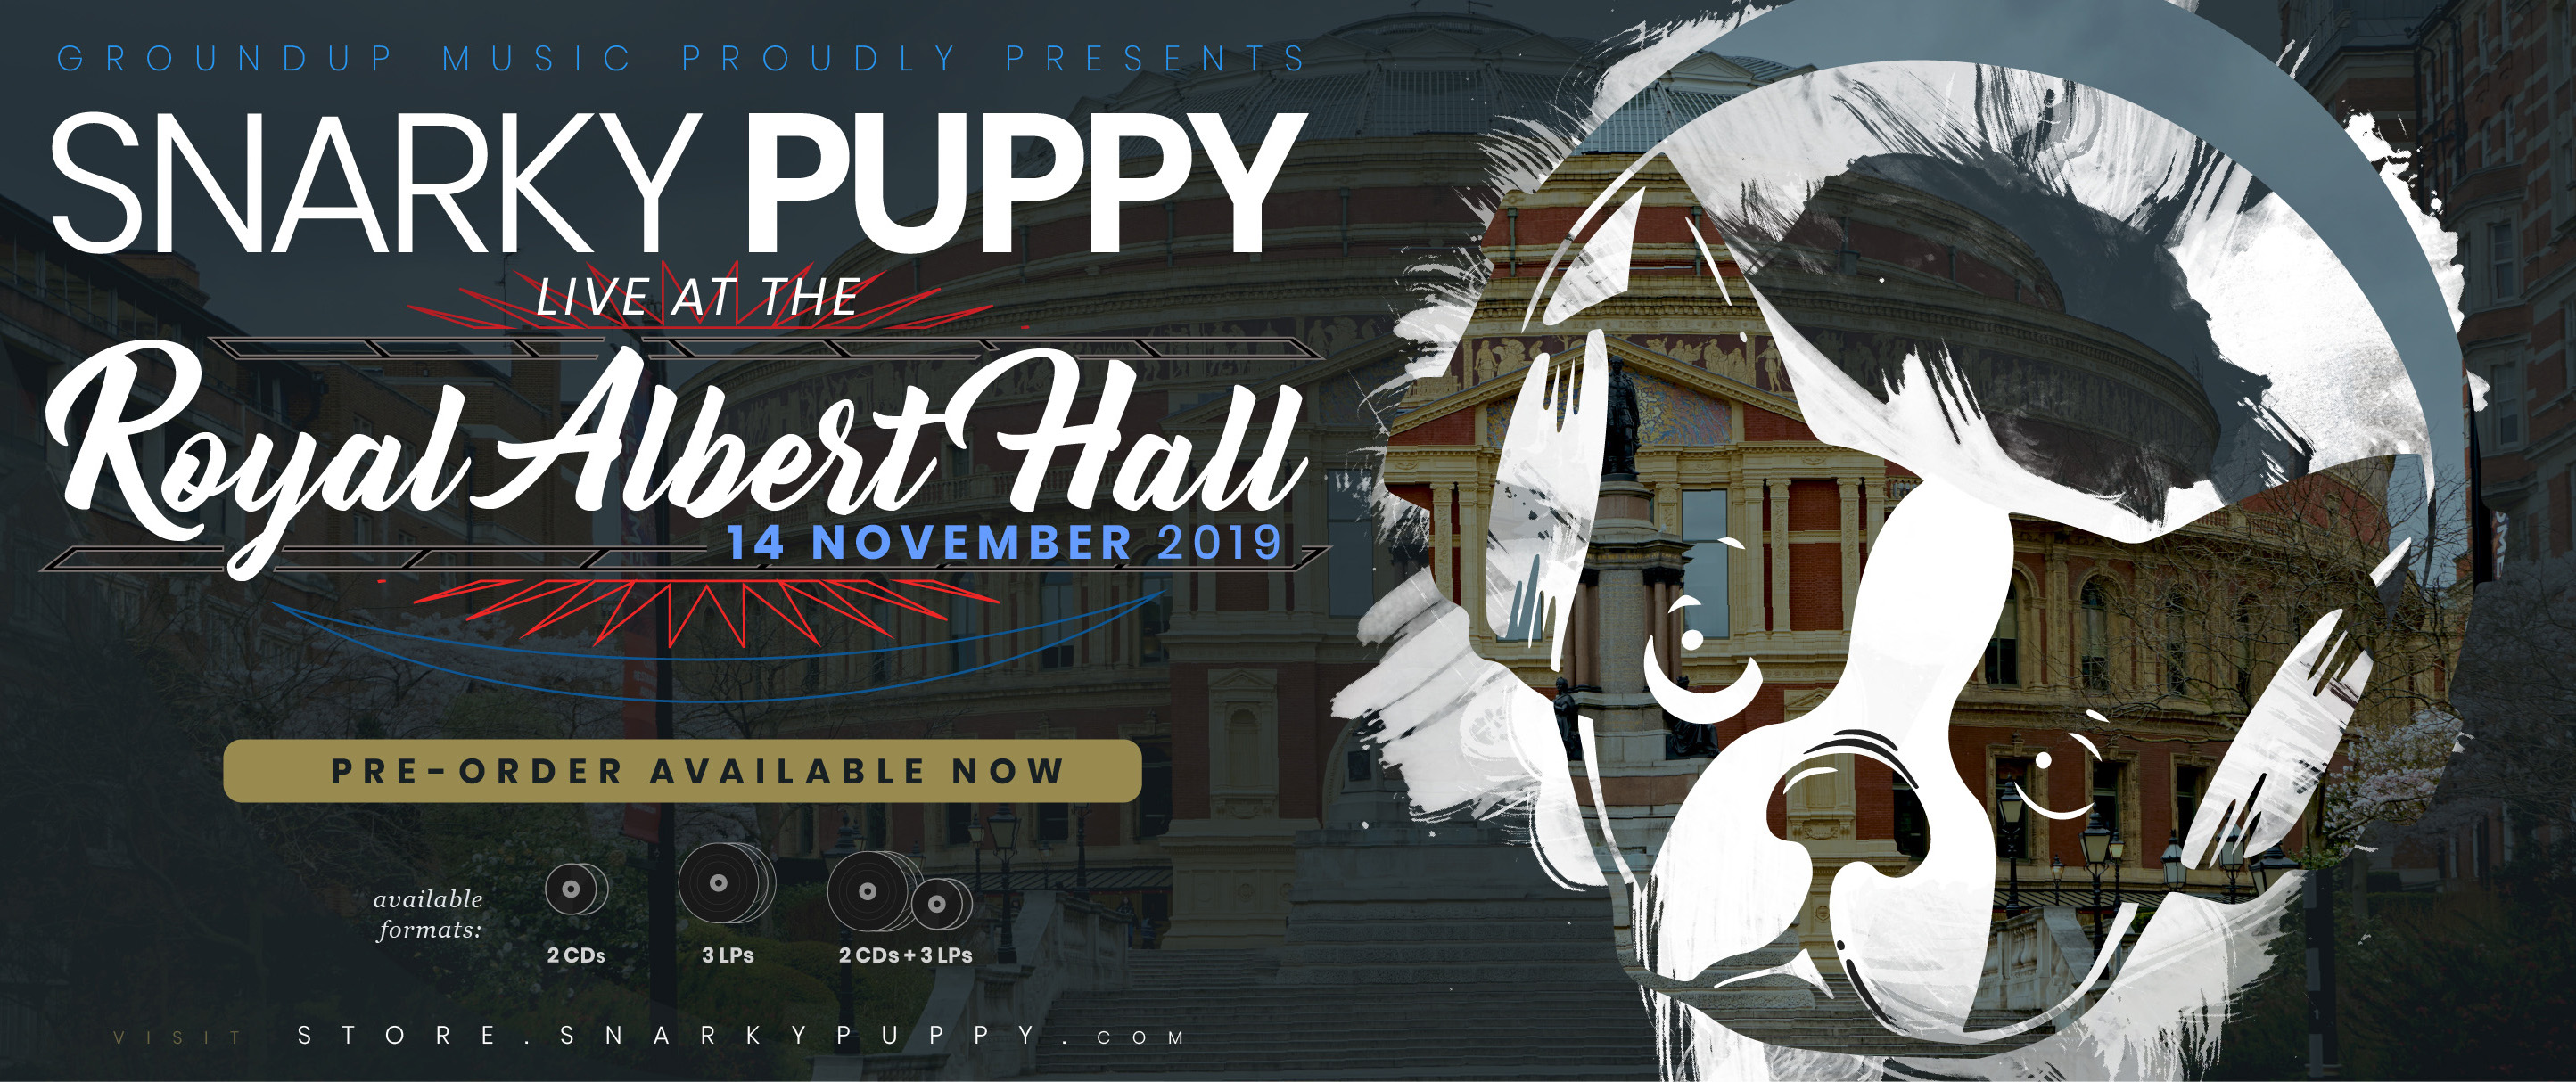 Pre-order Snarky Puppy LIVE At The Royal Albert Hall on 14 November 2019 in London, UK. Available in multiple formats.